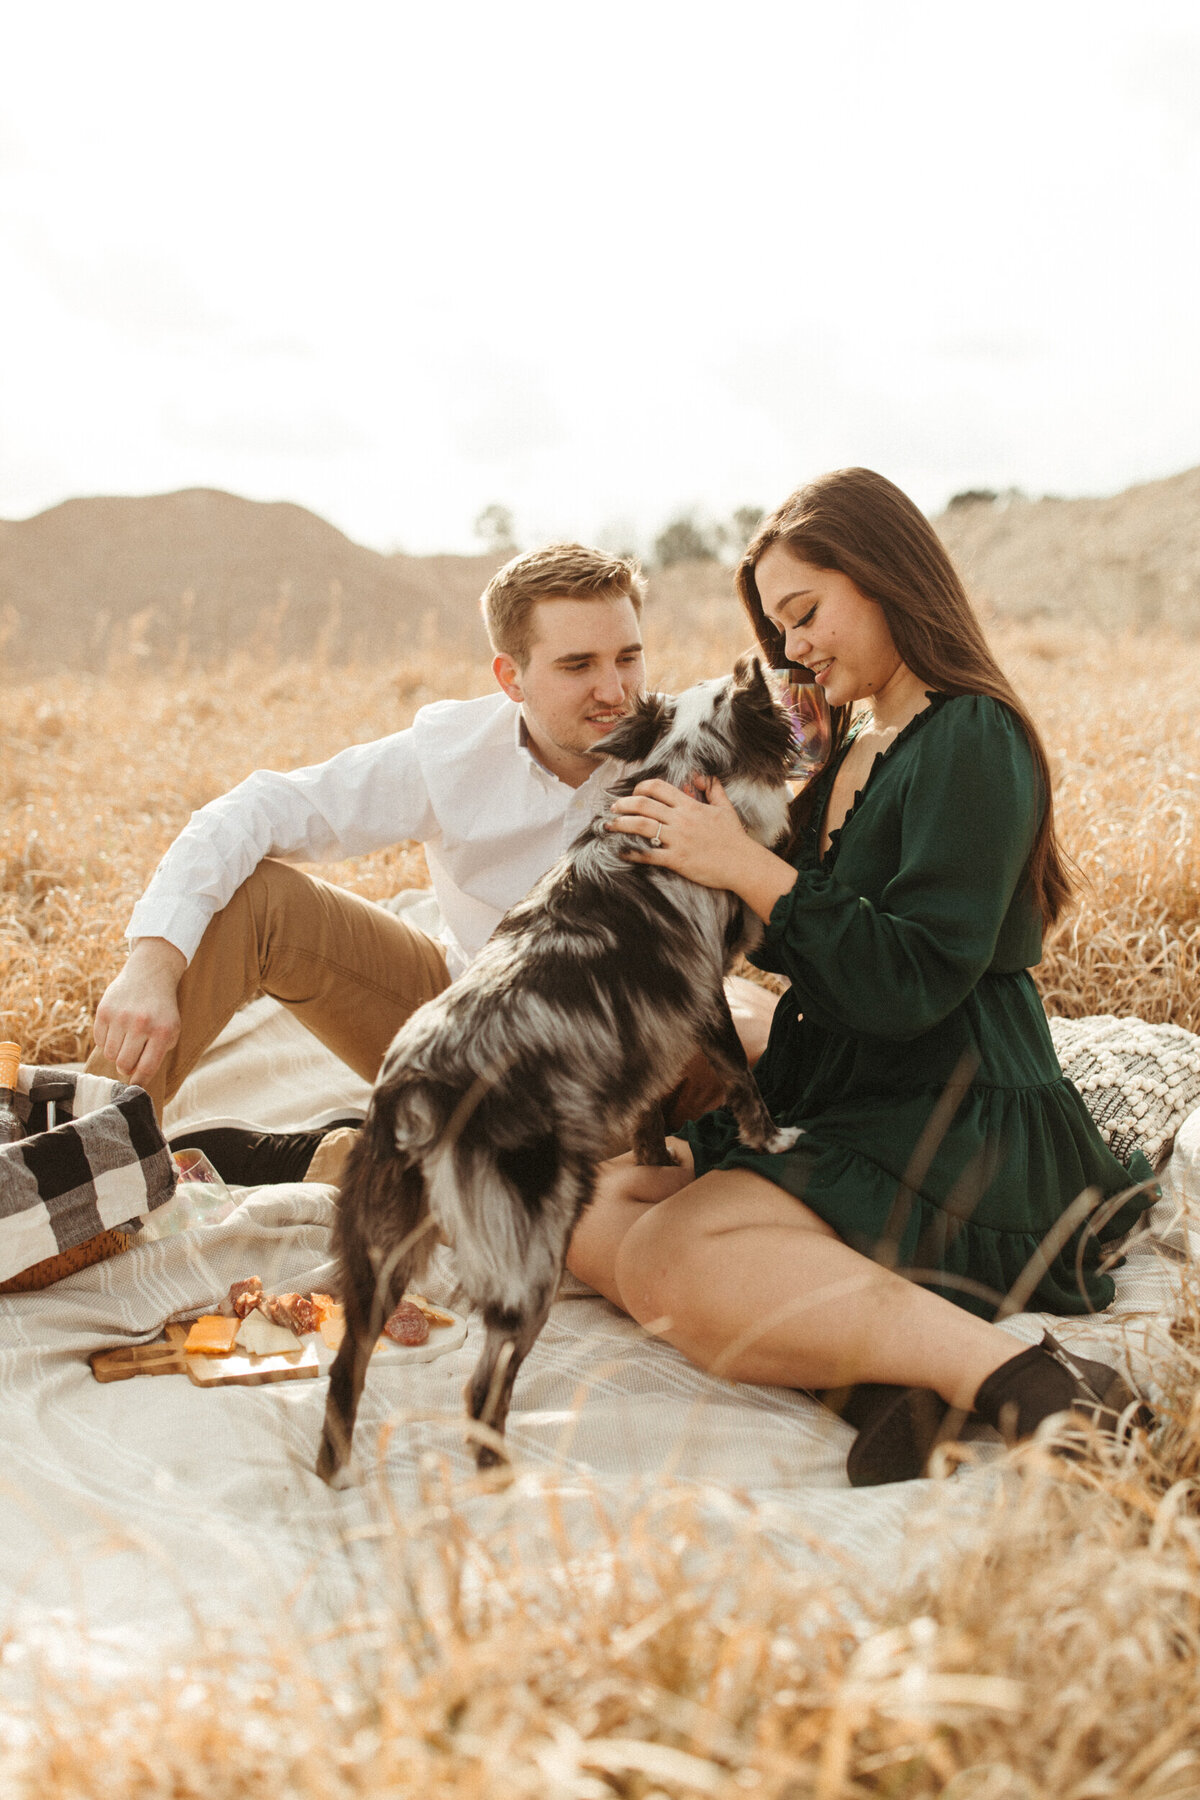 A couple is enjoying a charcuterie board during a picnic on a blanket in a field while their dog greets them.